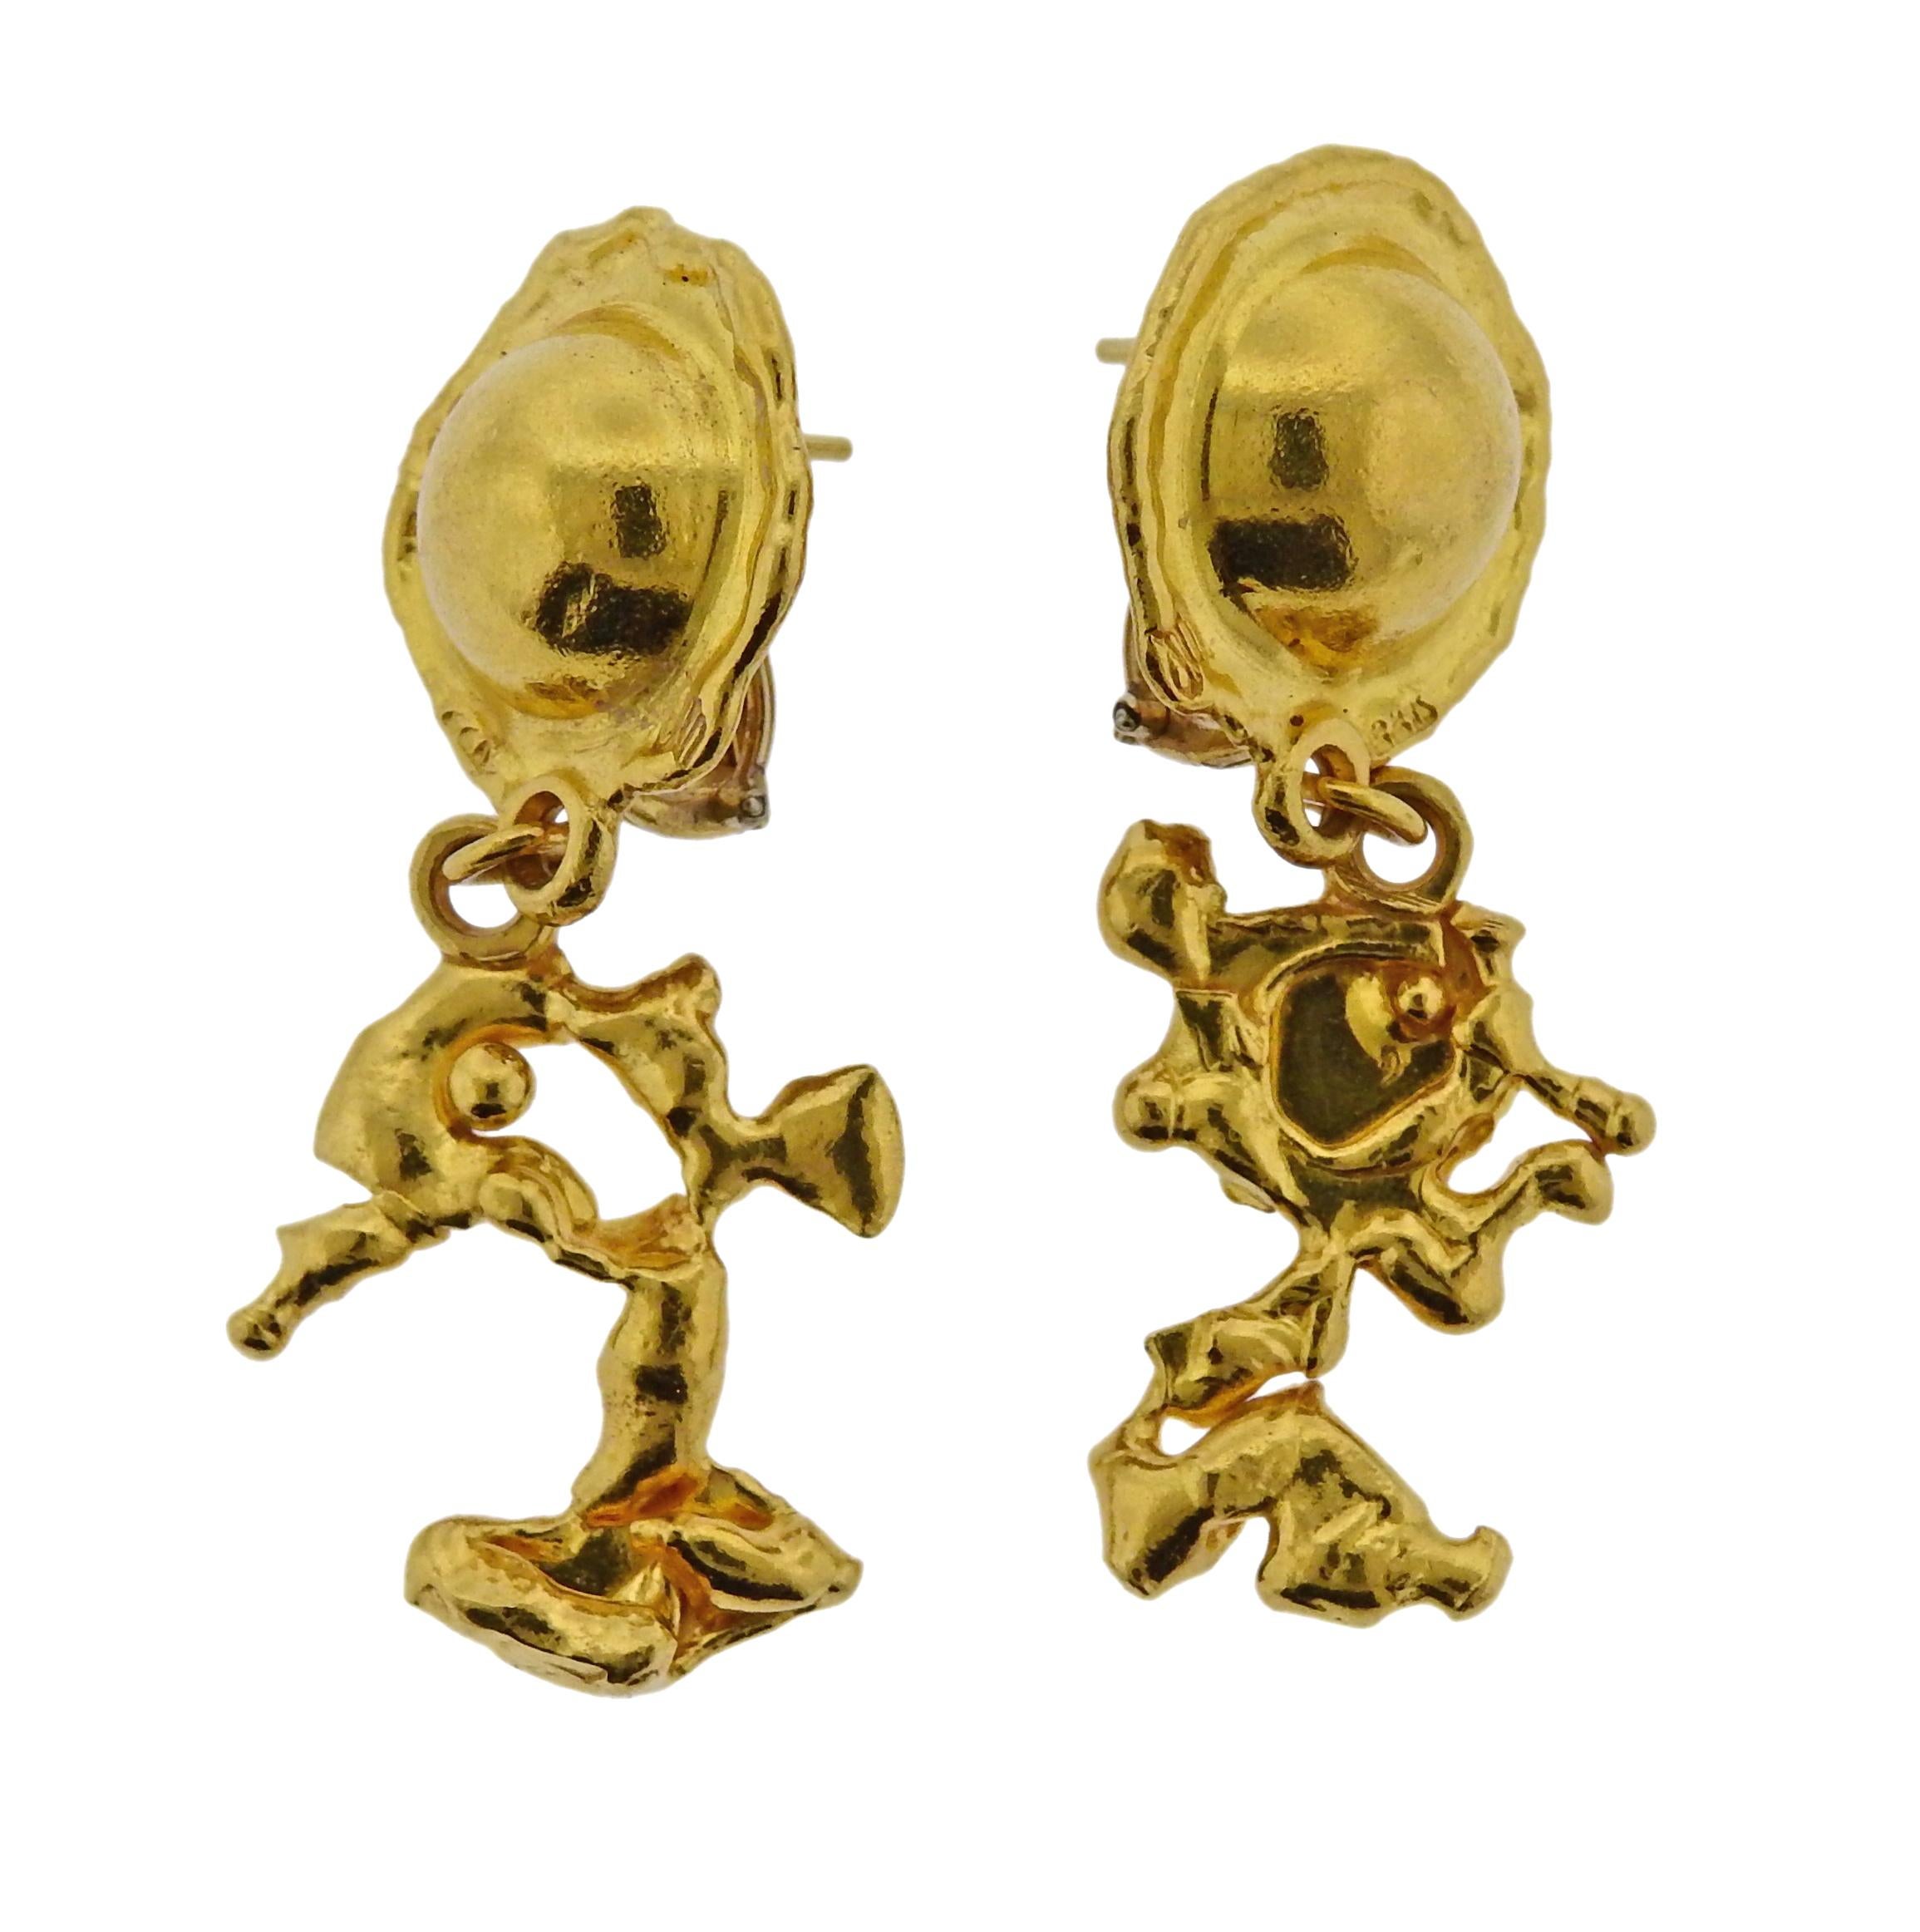 Pair of 22k gold Charming Creatures earrings, crafted by Jean Mahie. Earrings are 53mm x 24mm, weigh 25.9 grams. Marked:  M hallmark, 22k.